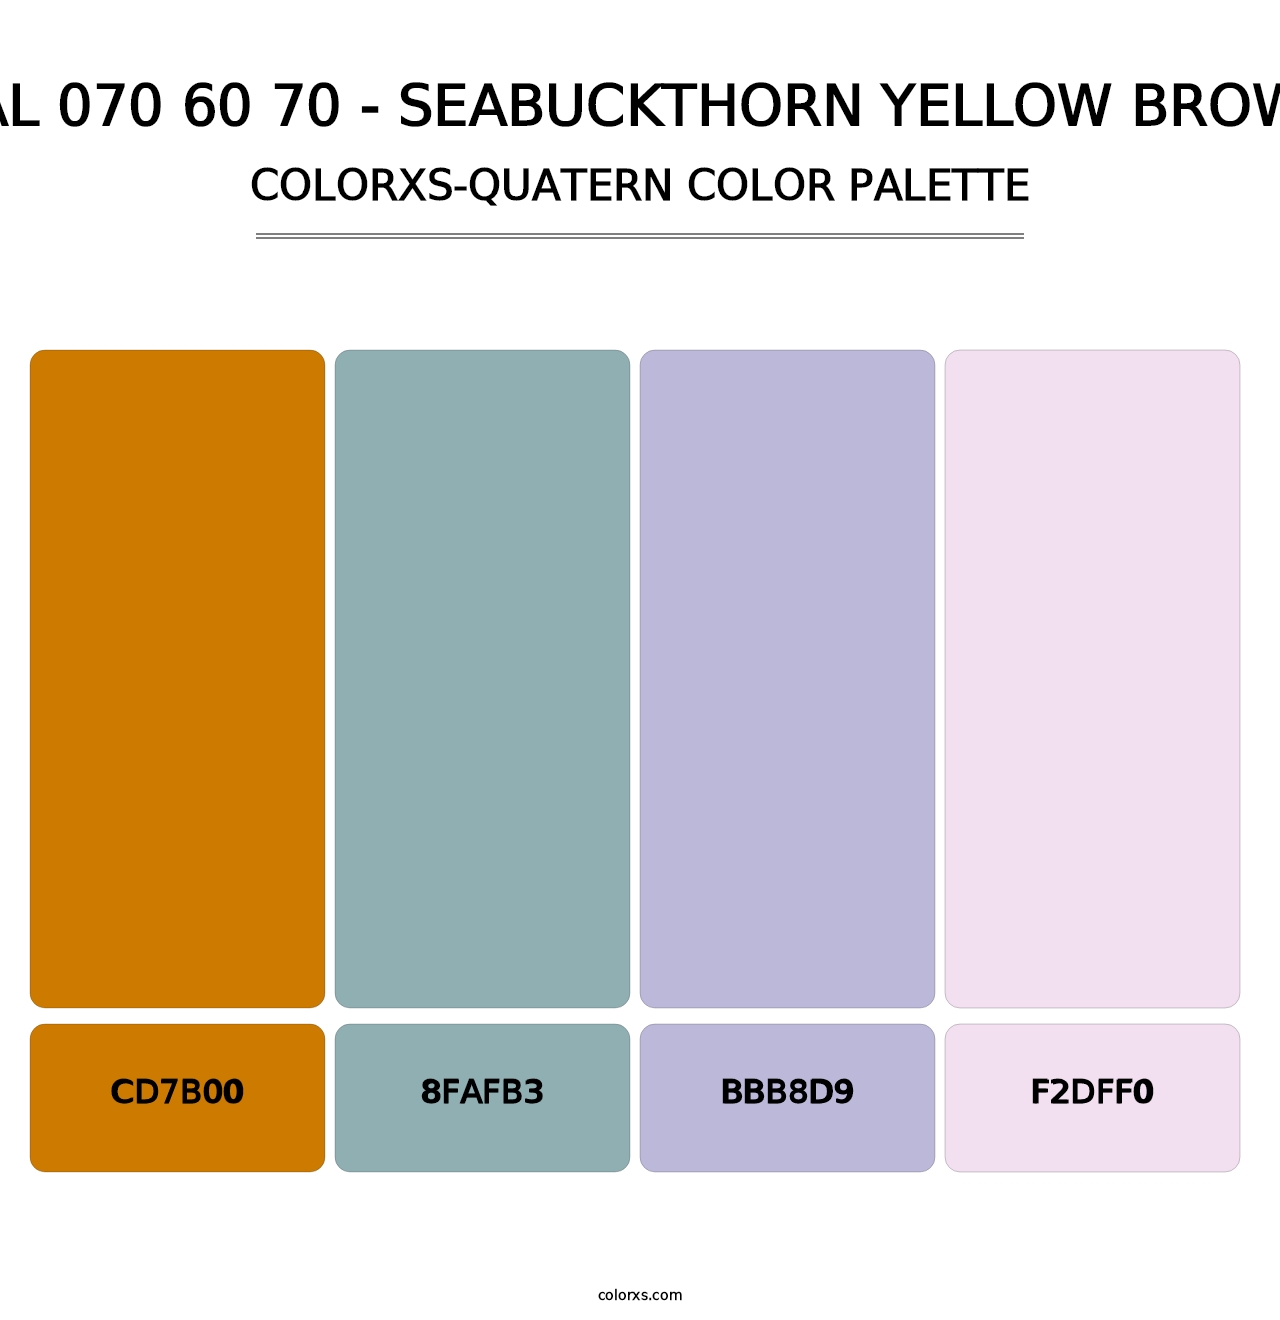 RAL 070 60 70 - Seabuckthorn Yellow Brown - Colorxs Quatern Palette